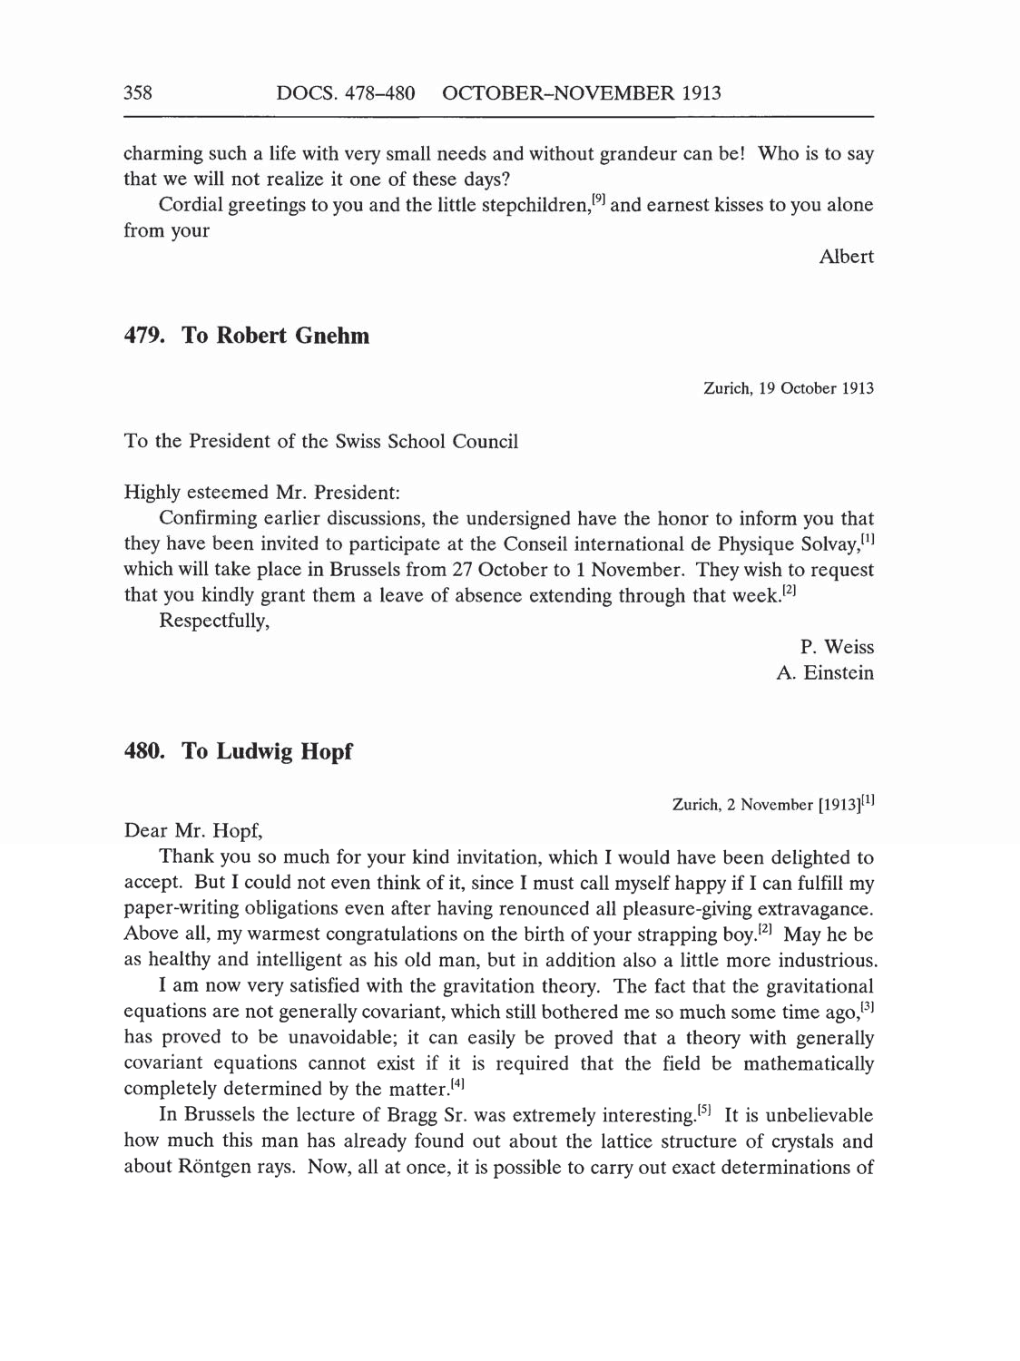 Volume 5: The Swiss Years: Correspondence, 1902-1914 (English translation supplement) page 358